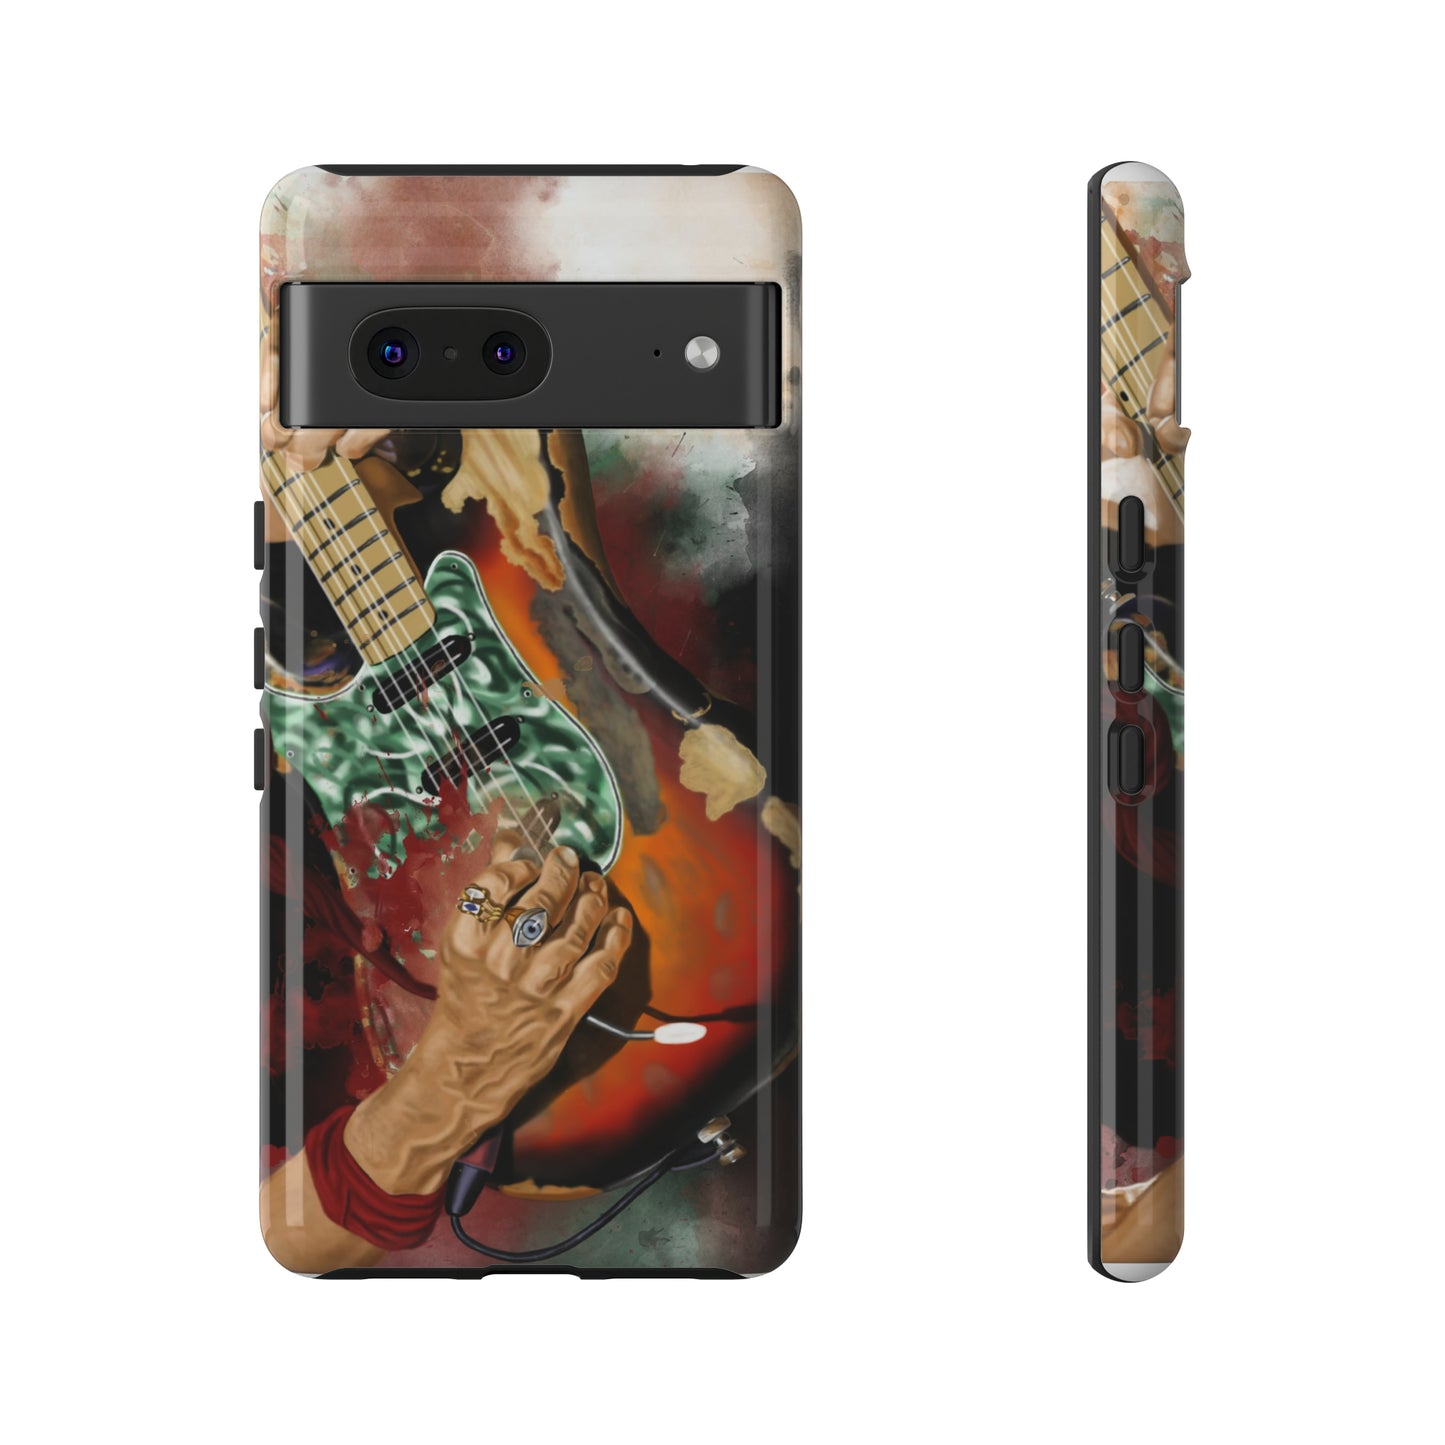 Digital painting of vintage electric guitar with hands printed on google phone case